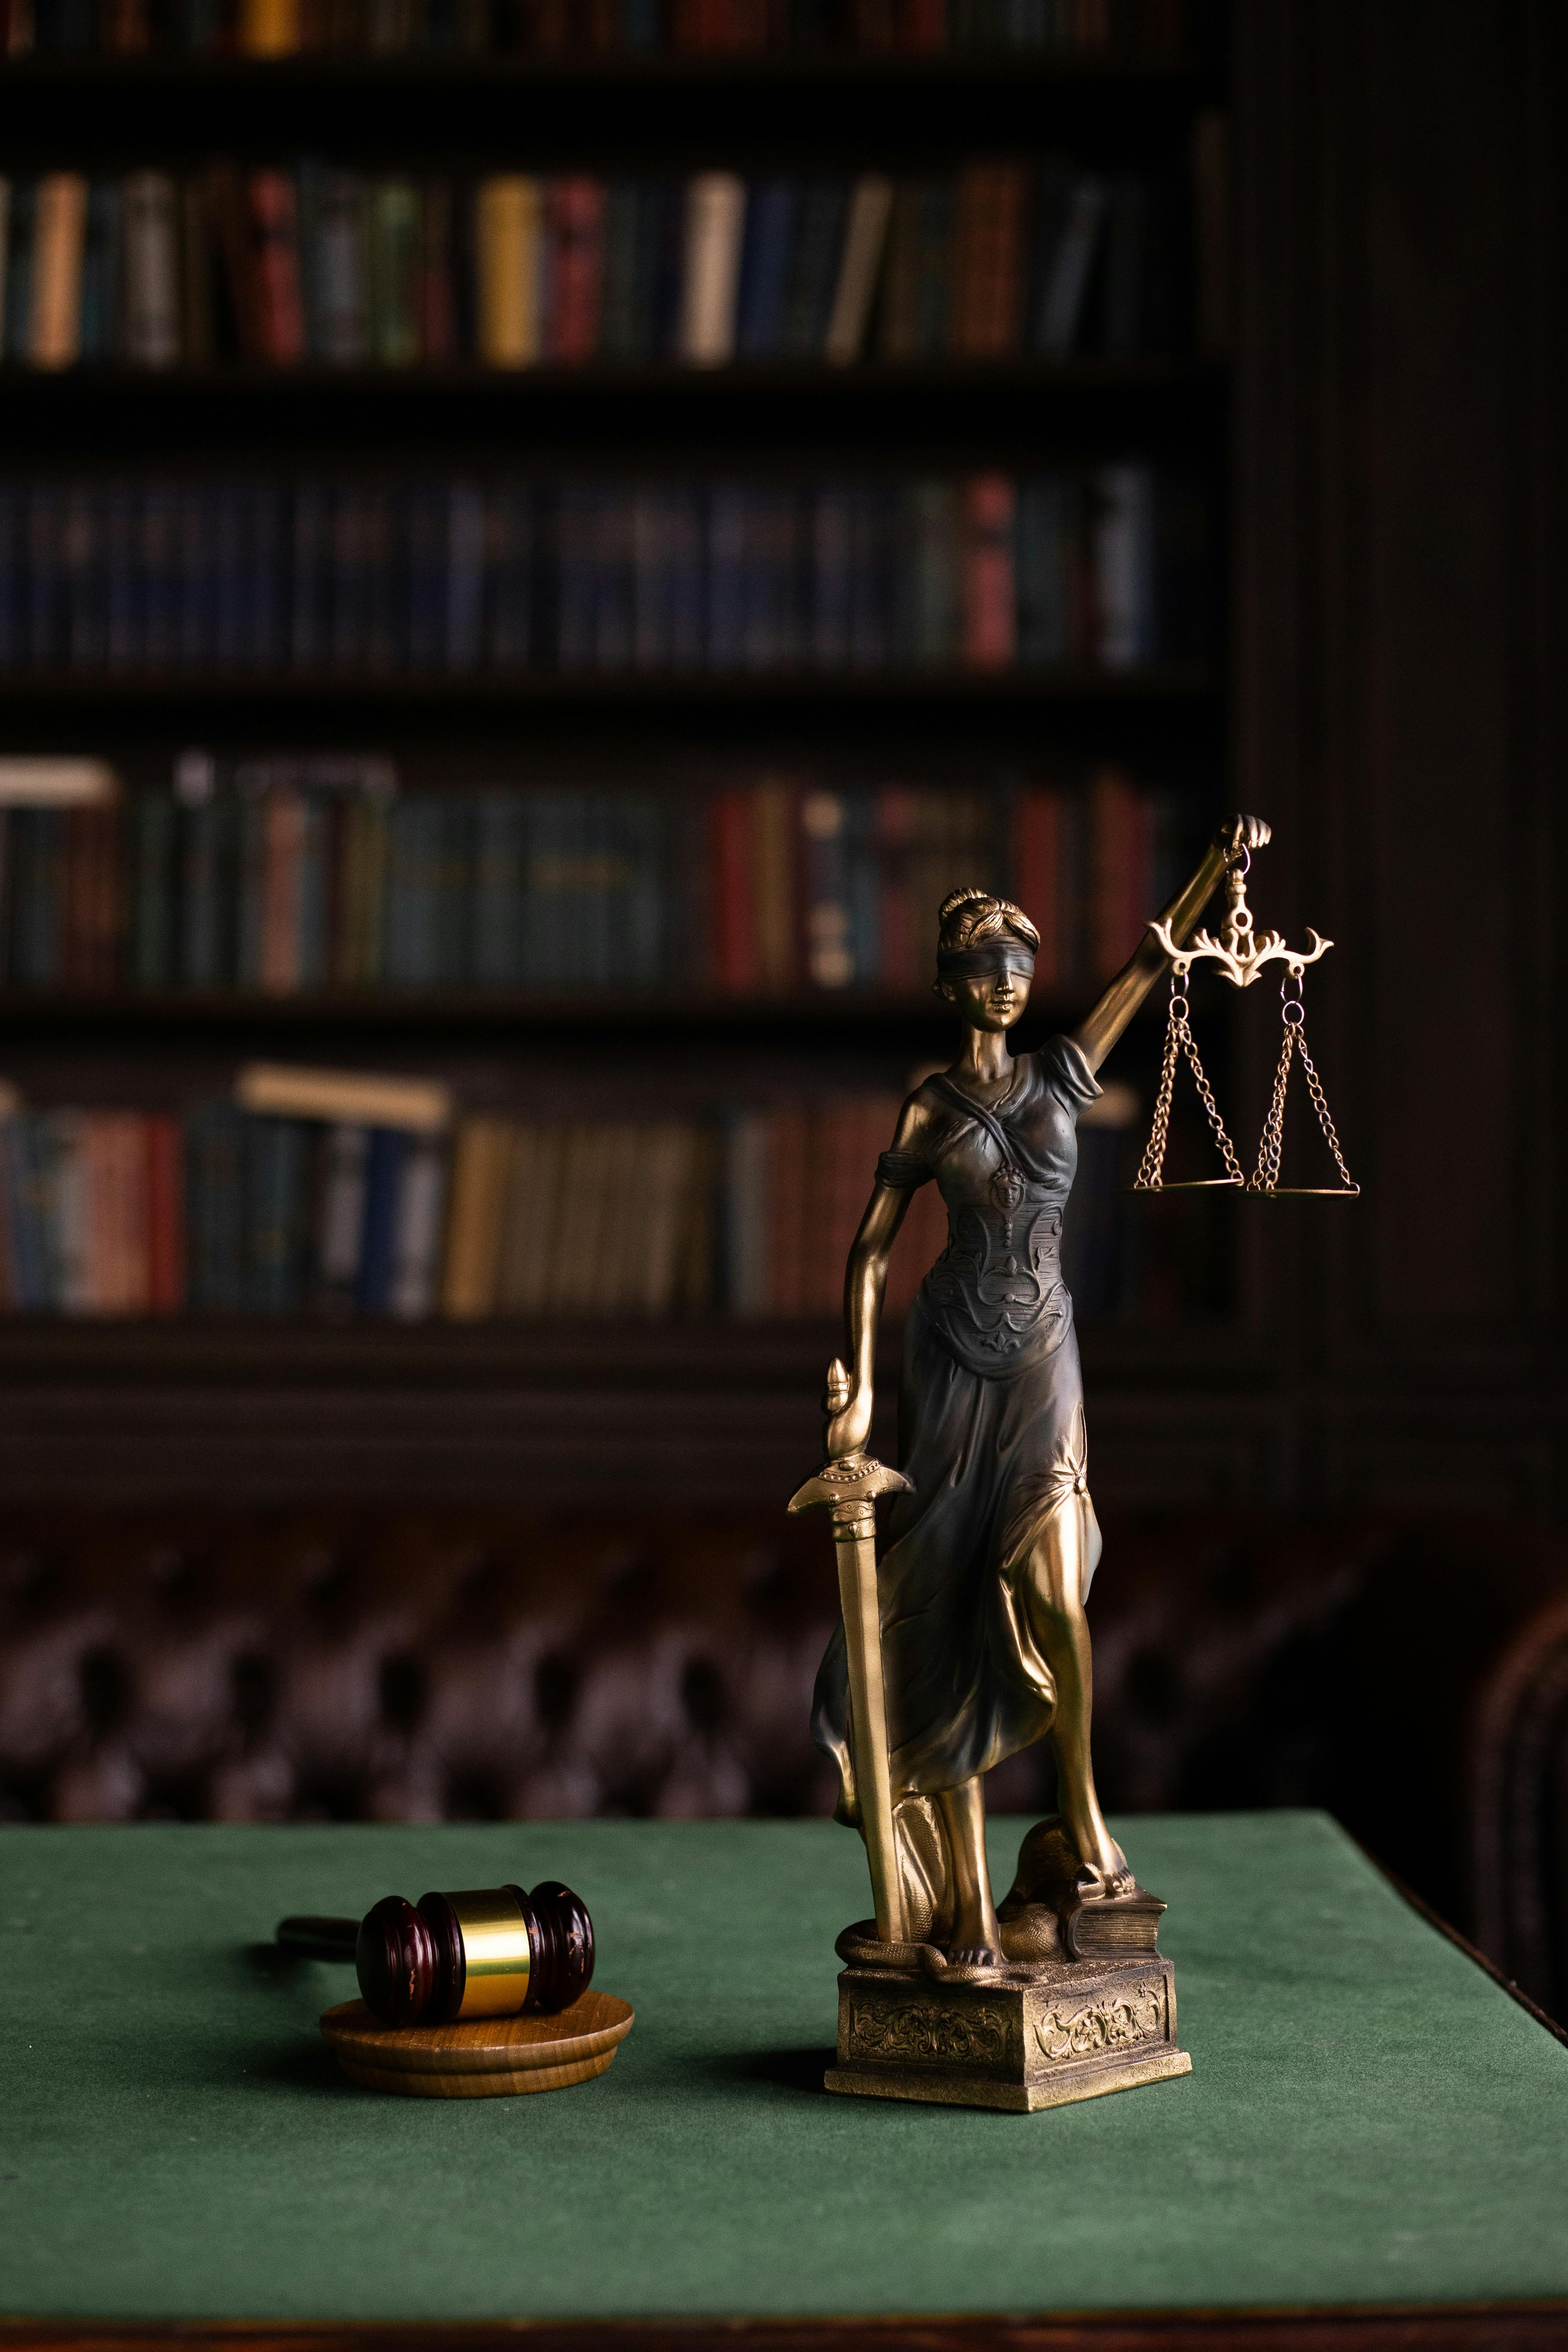 Legal And Law Concept Statue Of Lady Justice With Scales Of Justice  Background Stock Photo  Download Image Now  iStock